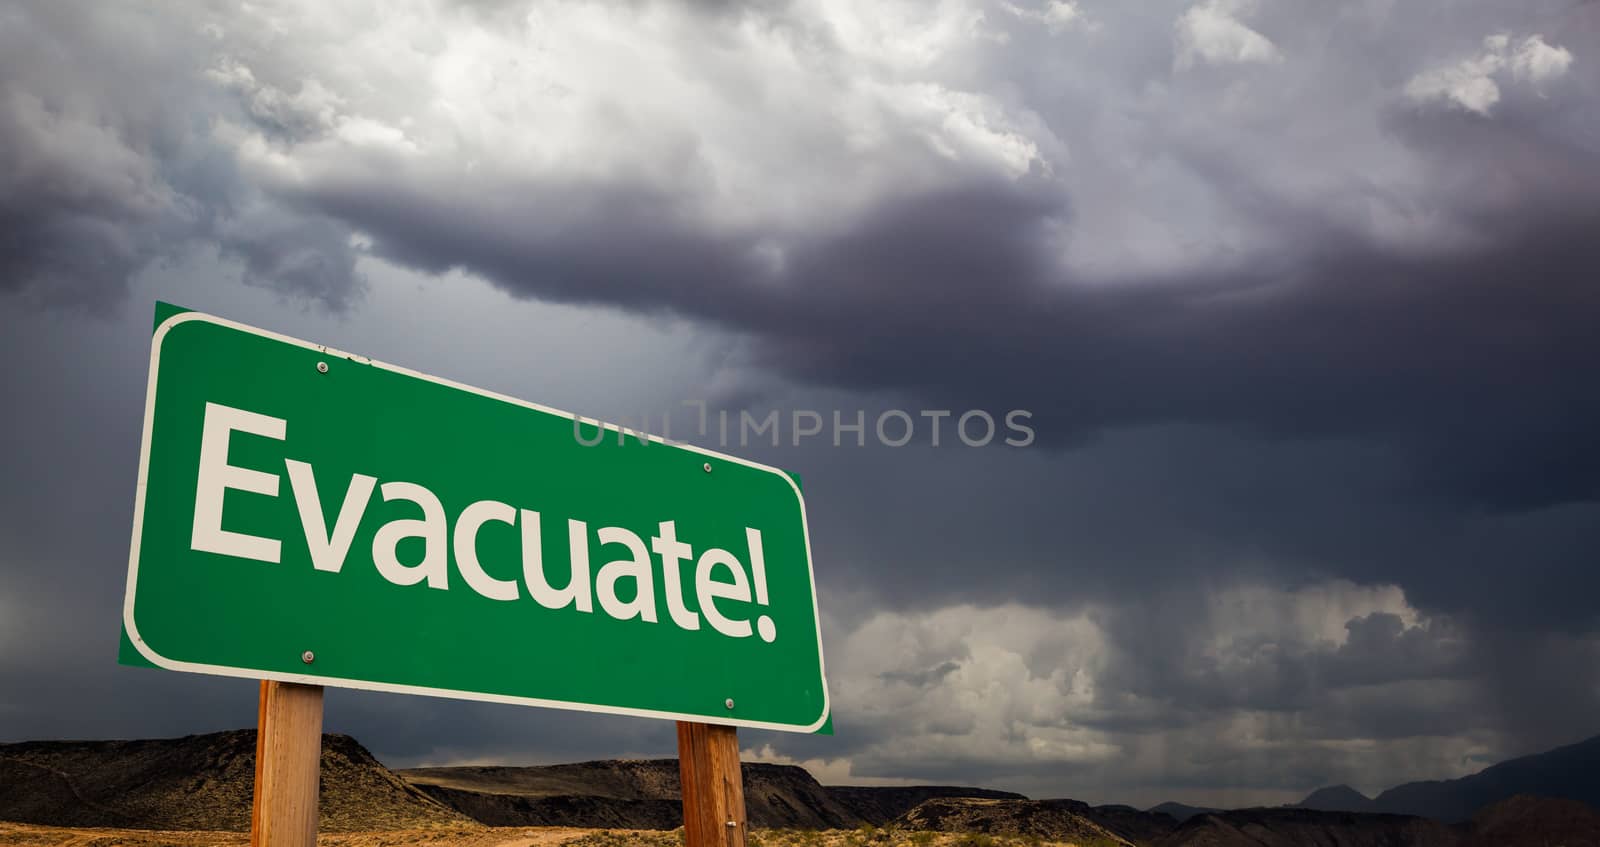 Evacuate Green Road Sign with Dramatic Clouds and Rain.